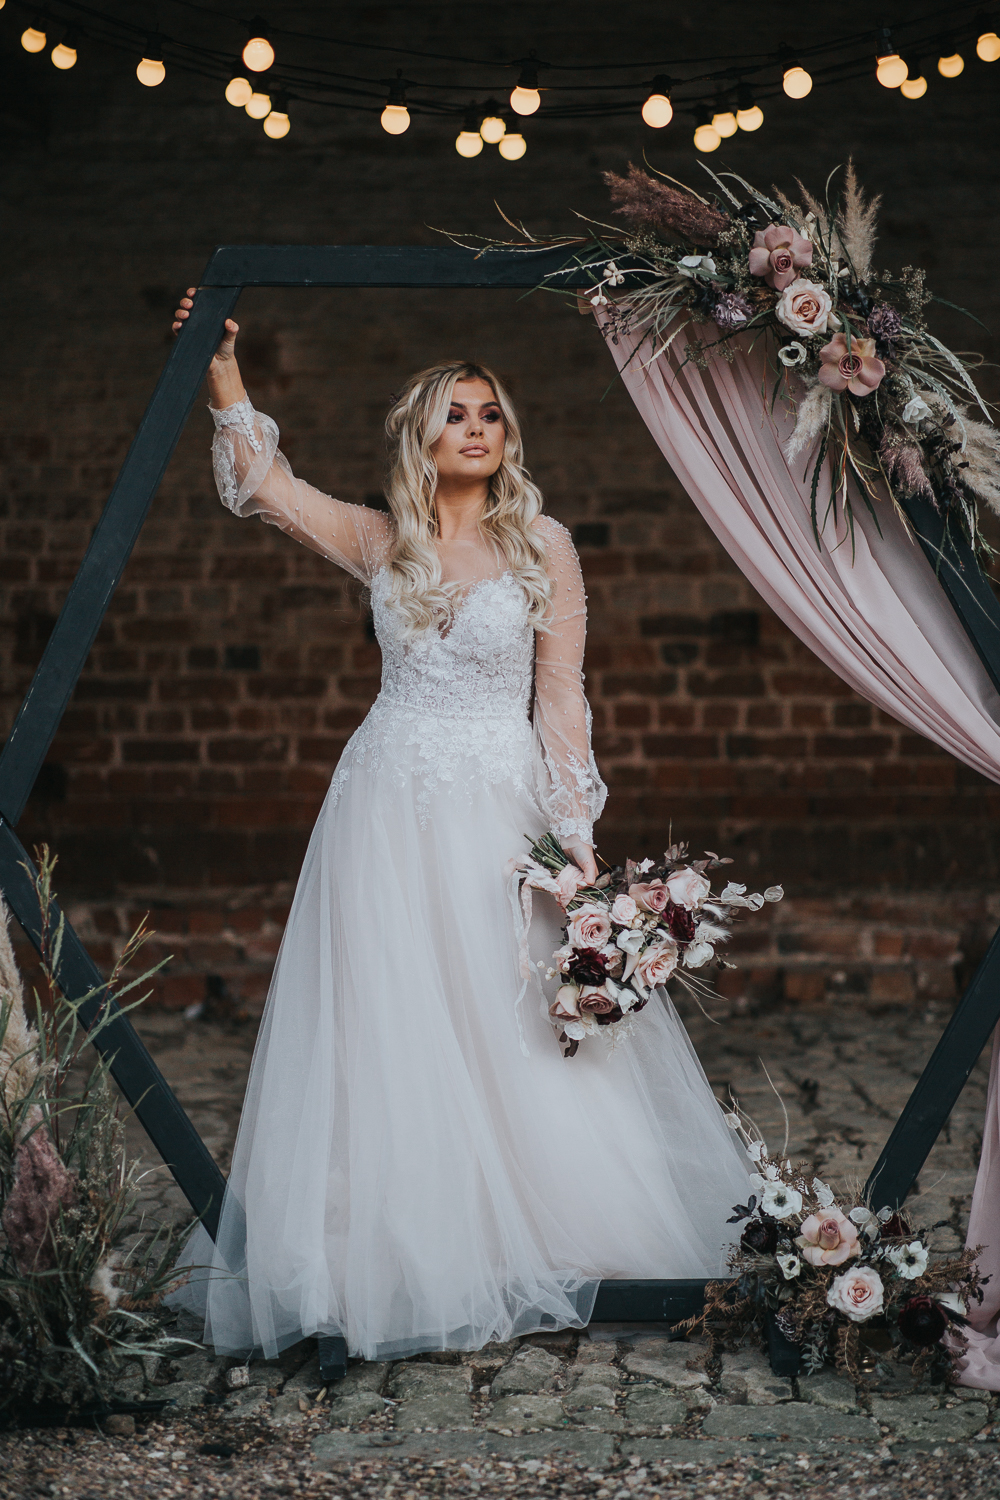 A black hex wedding arch was decorated with blush and mauve blooms, pampas grass and greenery